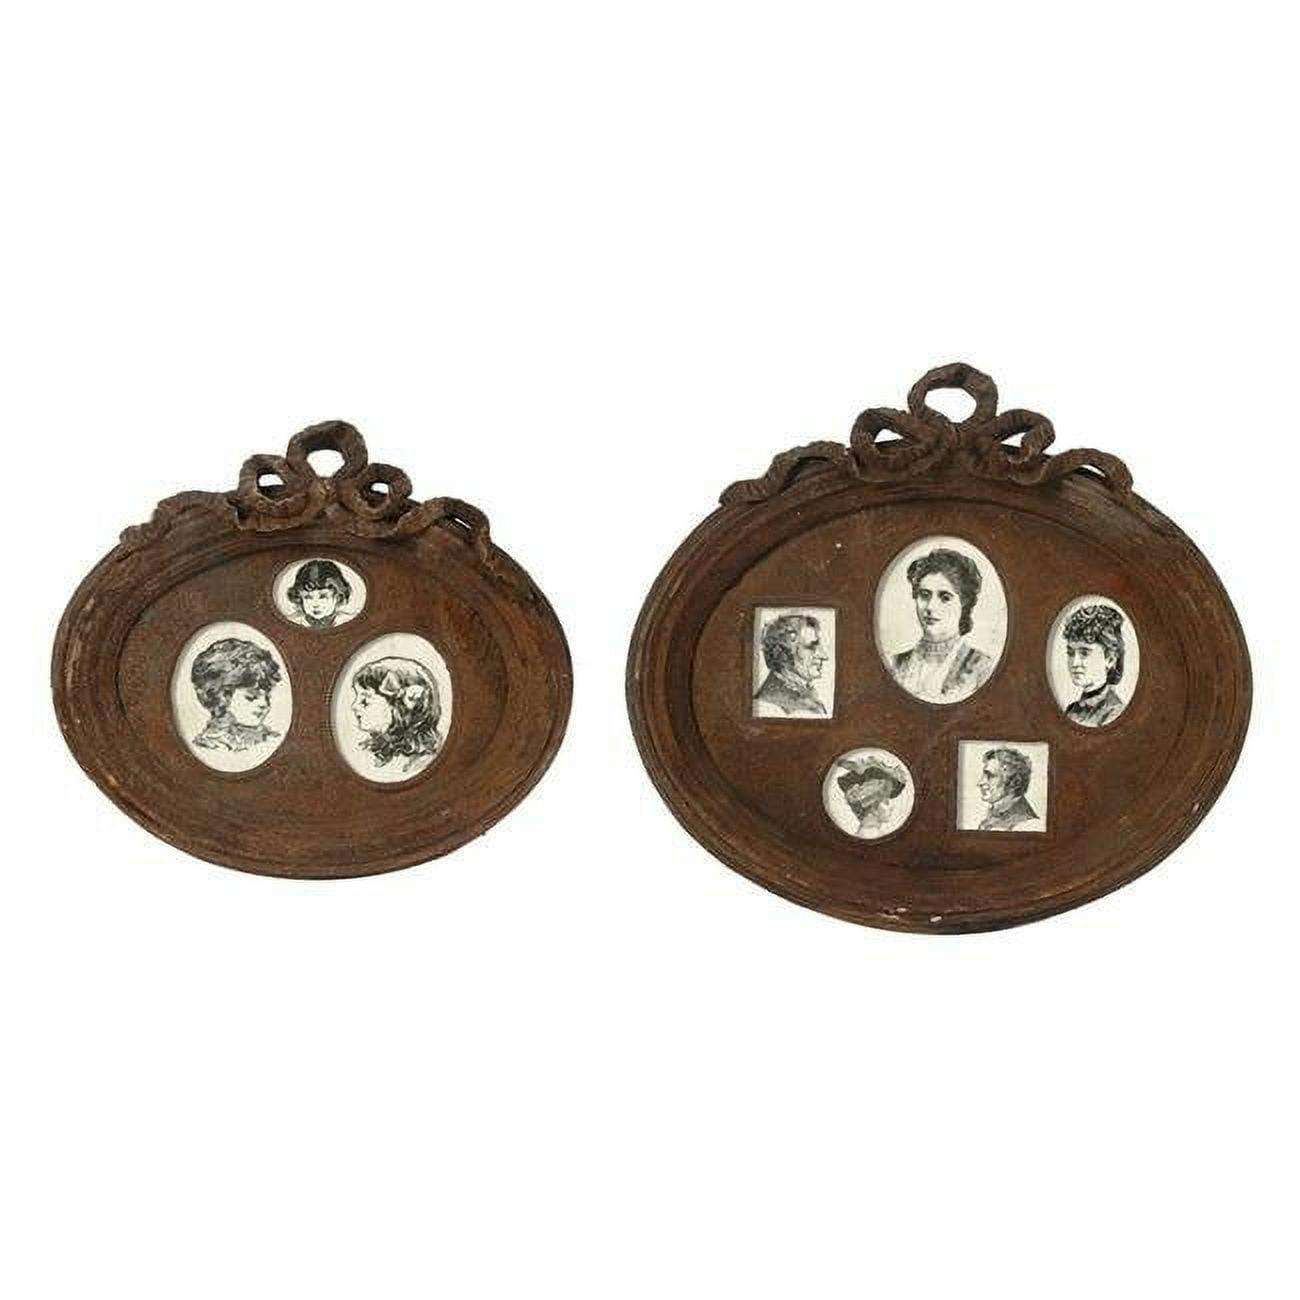 Rustic Brown Ceramic Wall Photo Frame Set with Traditional Carvings